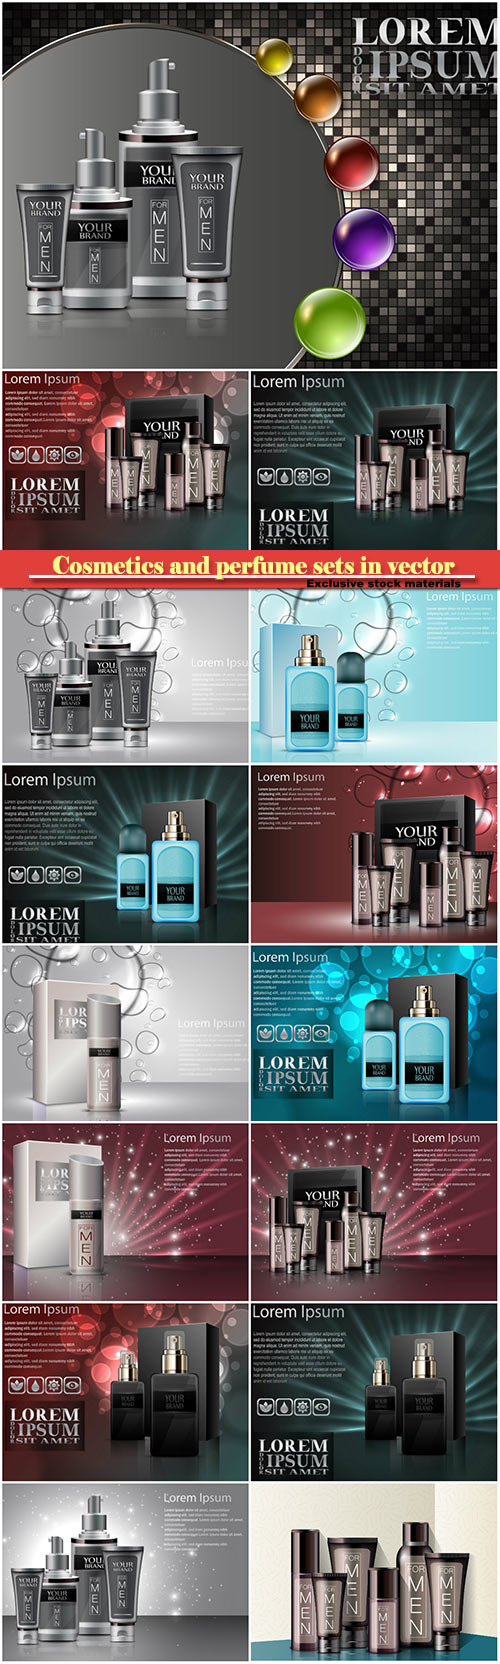 Cosmetics and perfume sets in vector